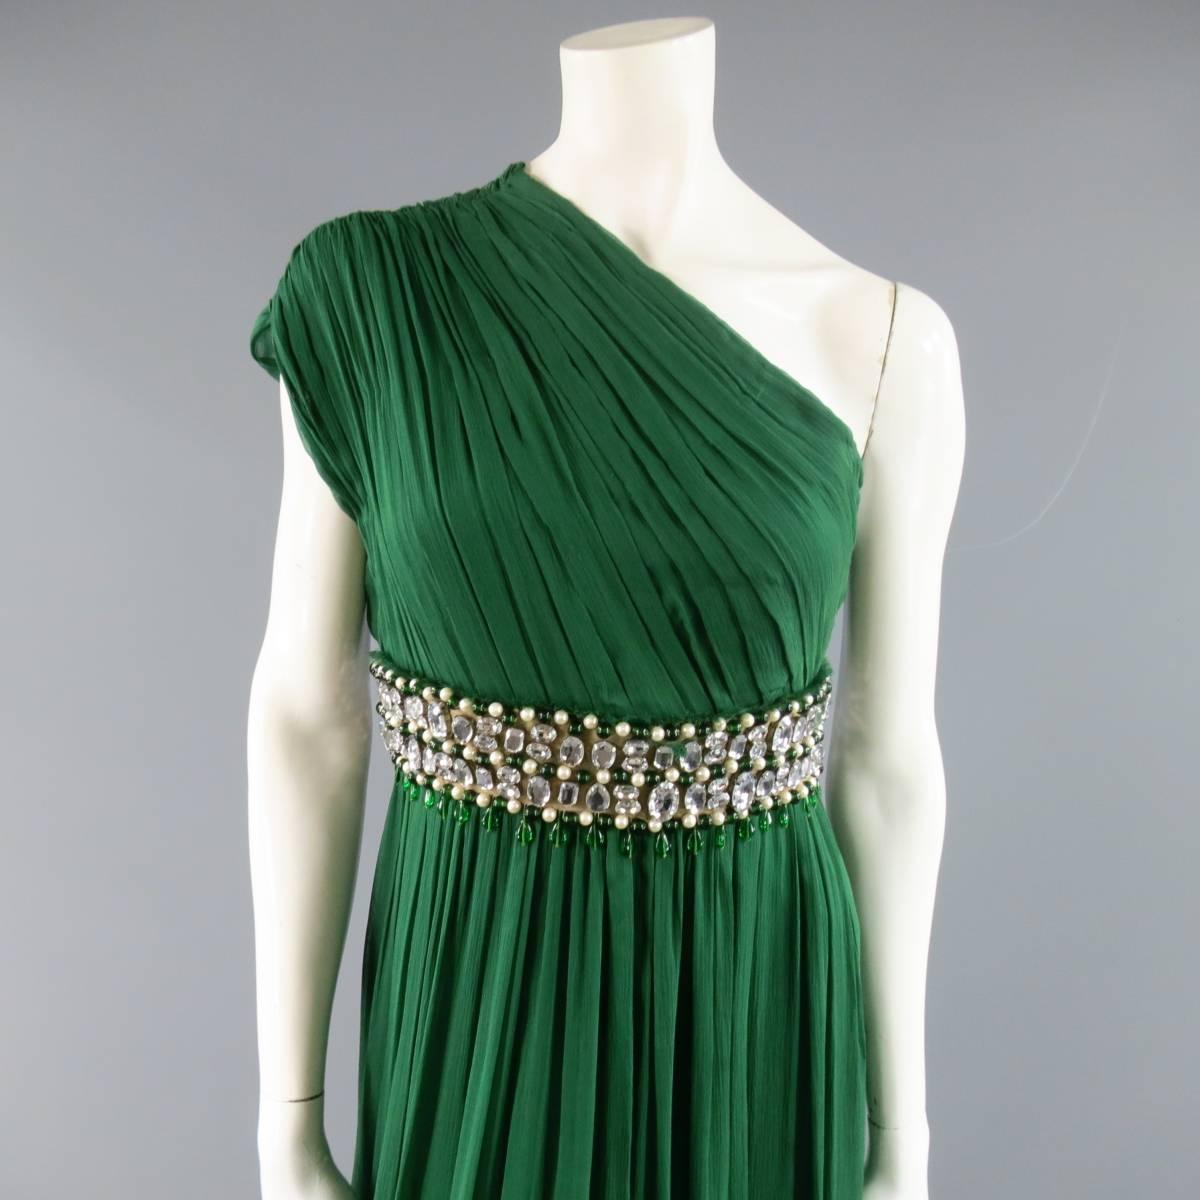 This stunning NAEEM KHAN evening gown comes in emerald green silk crepe chiffon and features a pleated one shoulder bodice, flowing layered pleat skirt, and beige fabric embellished waist with raw edge, faux pearl and rhinestone jewel